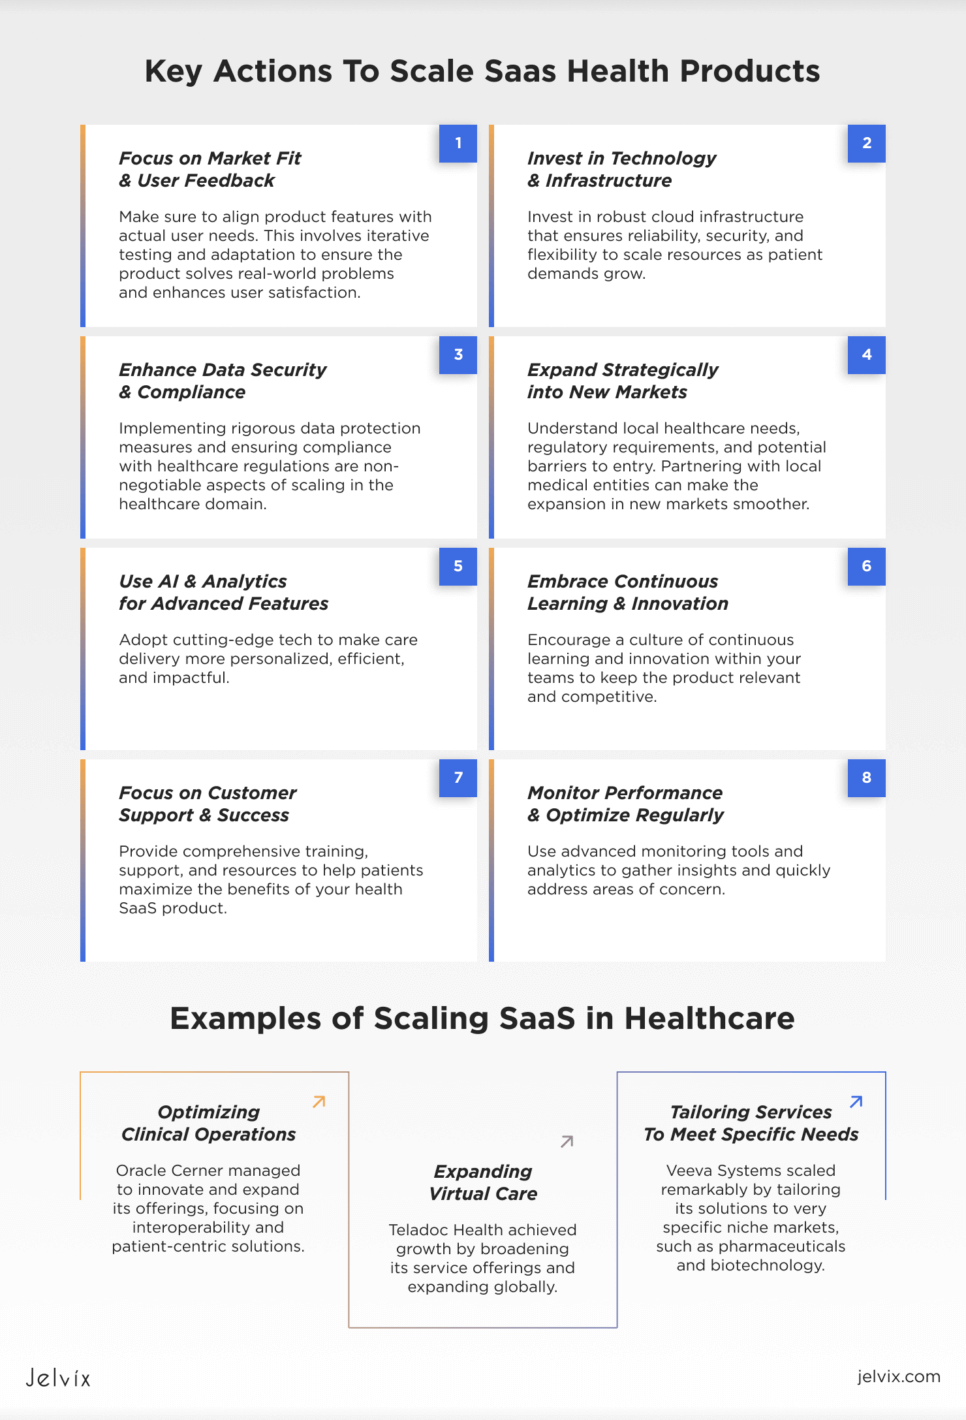 How to Develop and Scale Your SaaS Product